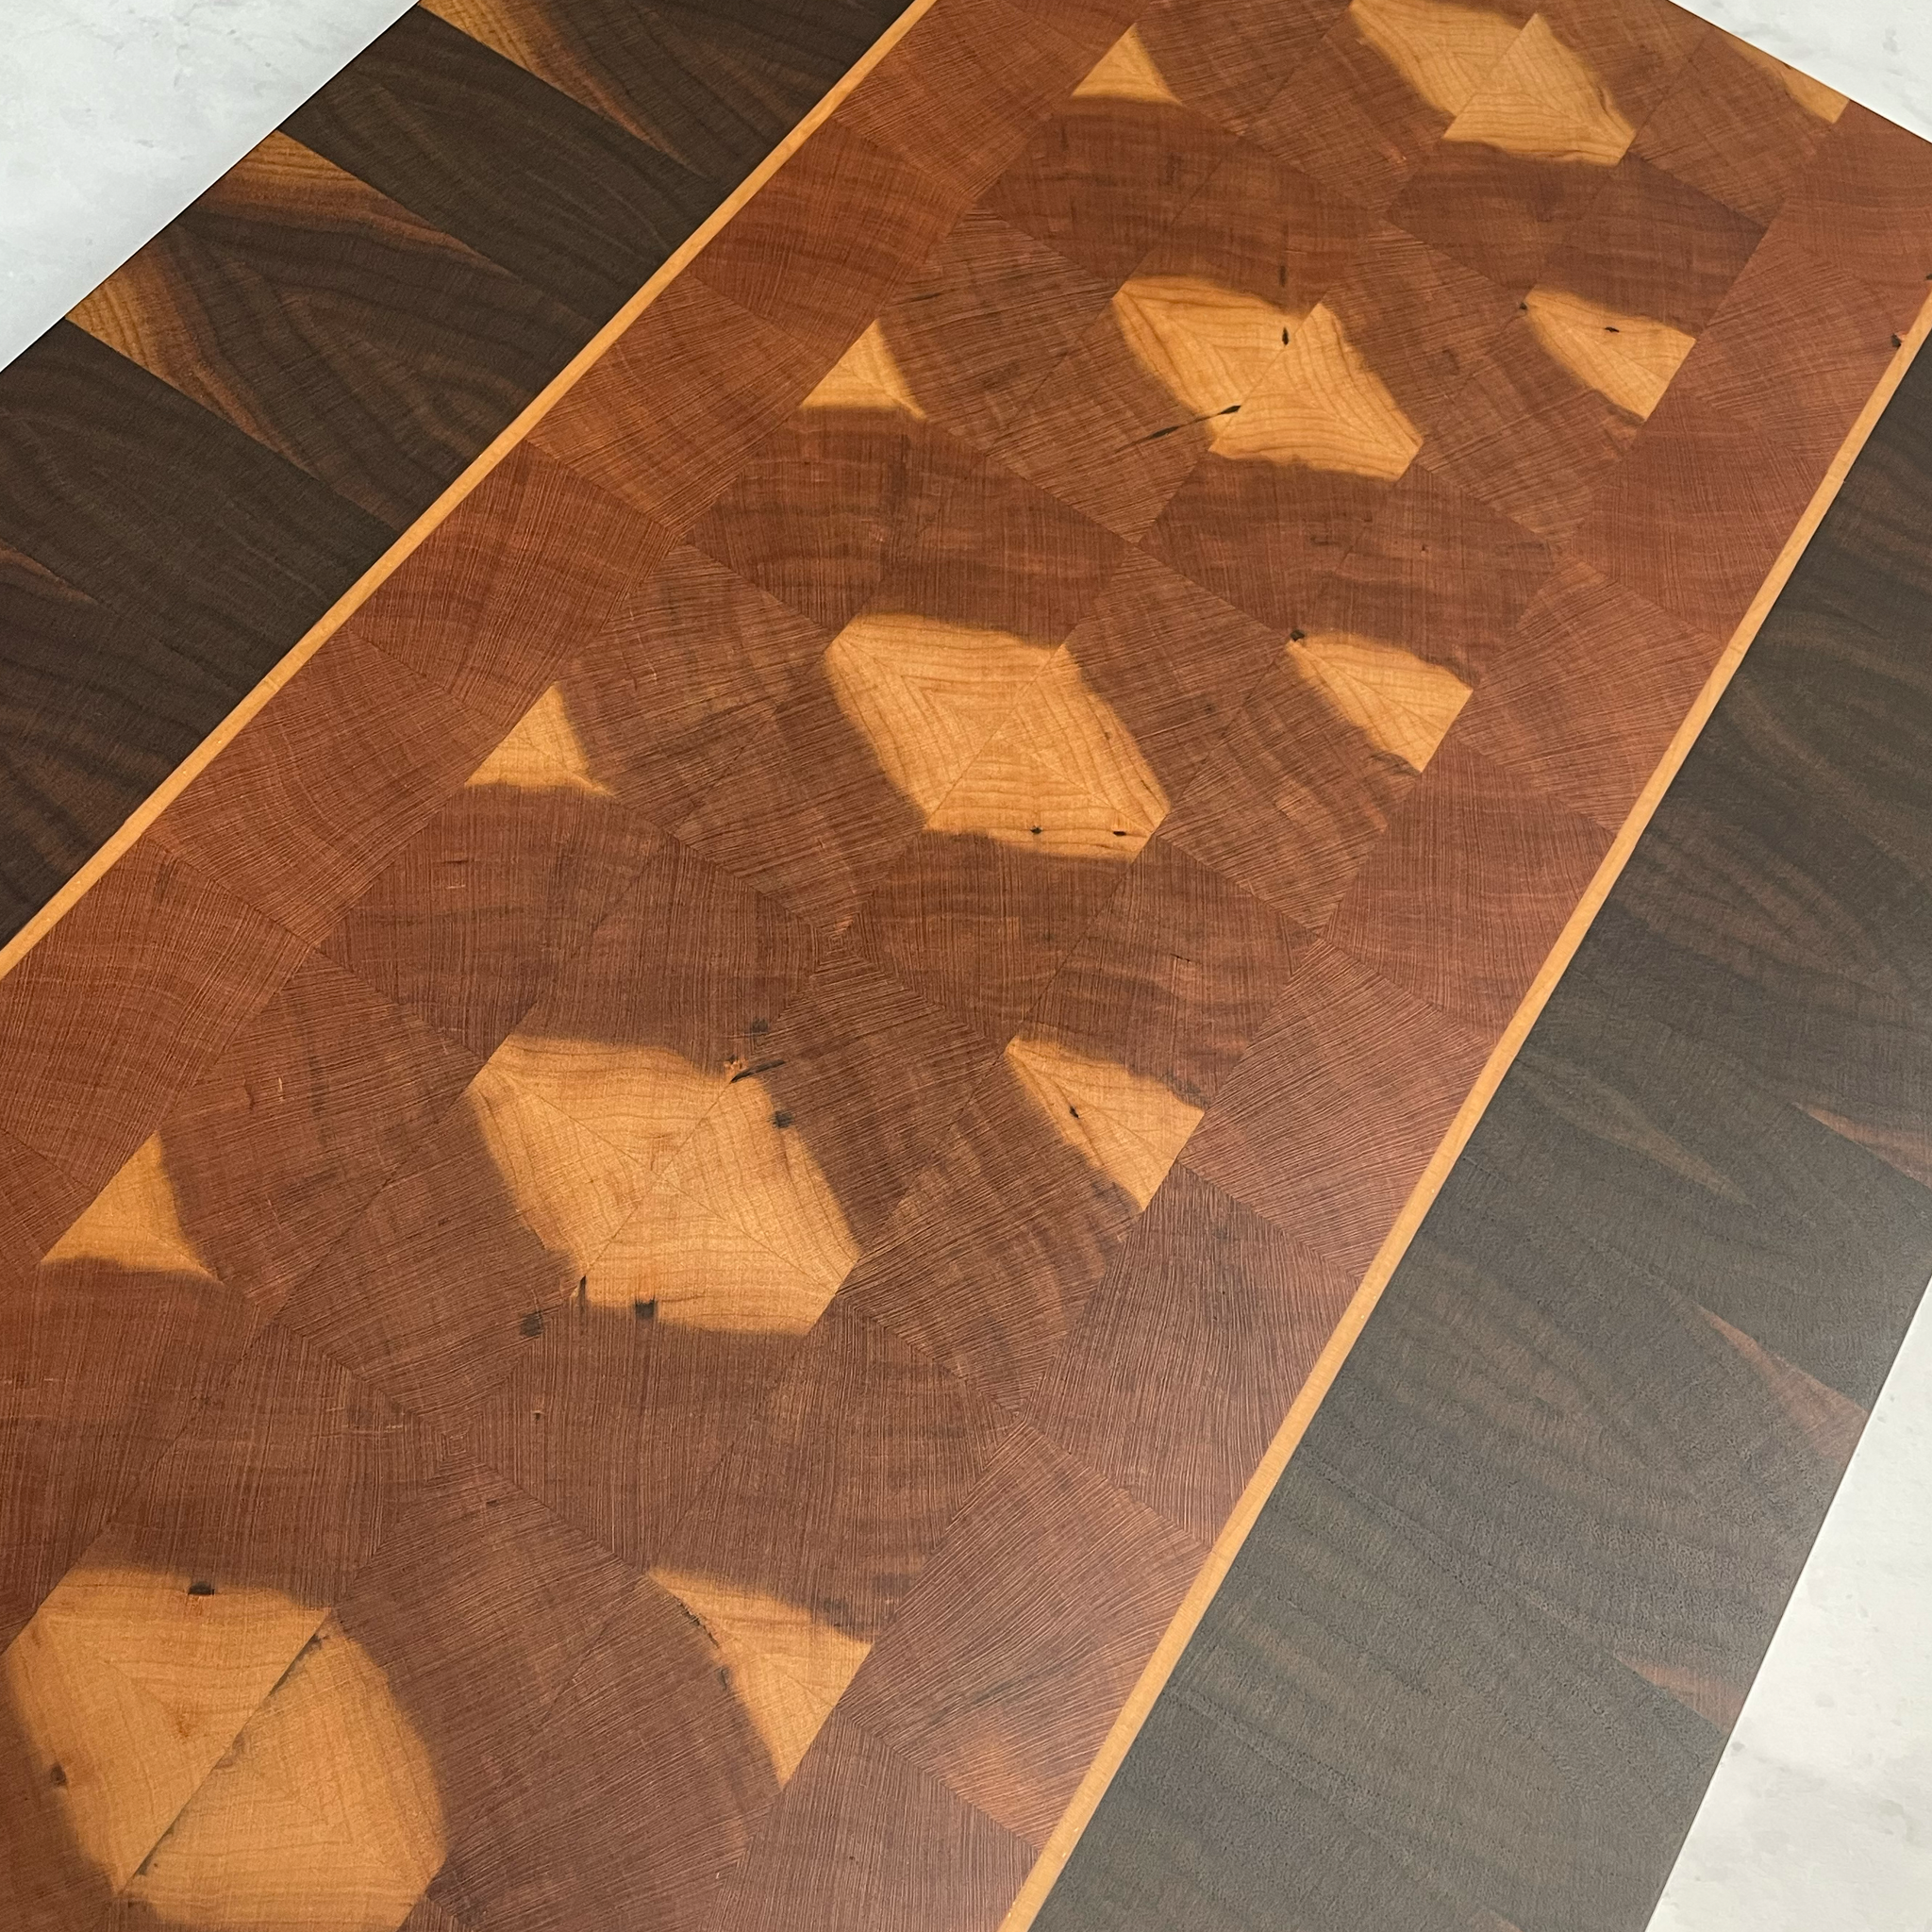 End Grain Wood Cutting Boards - 3 Sizes, 5 Woods Choices